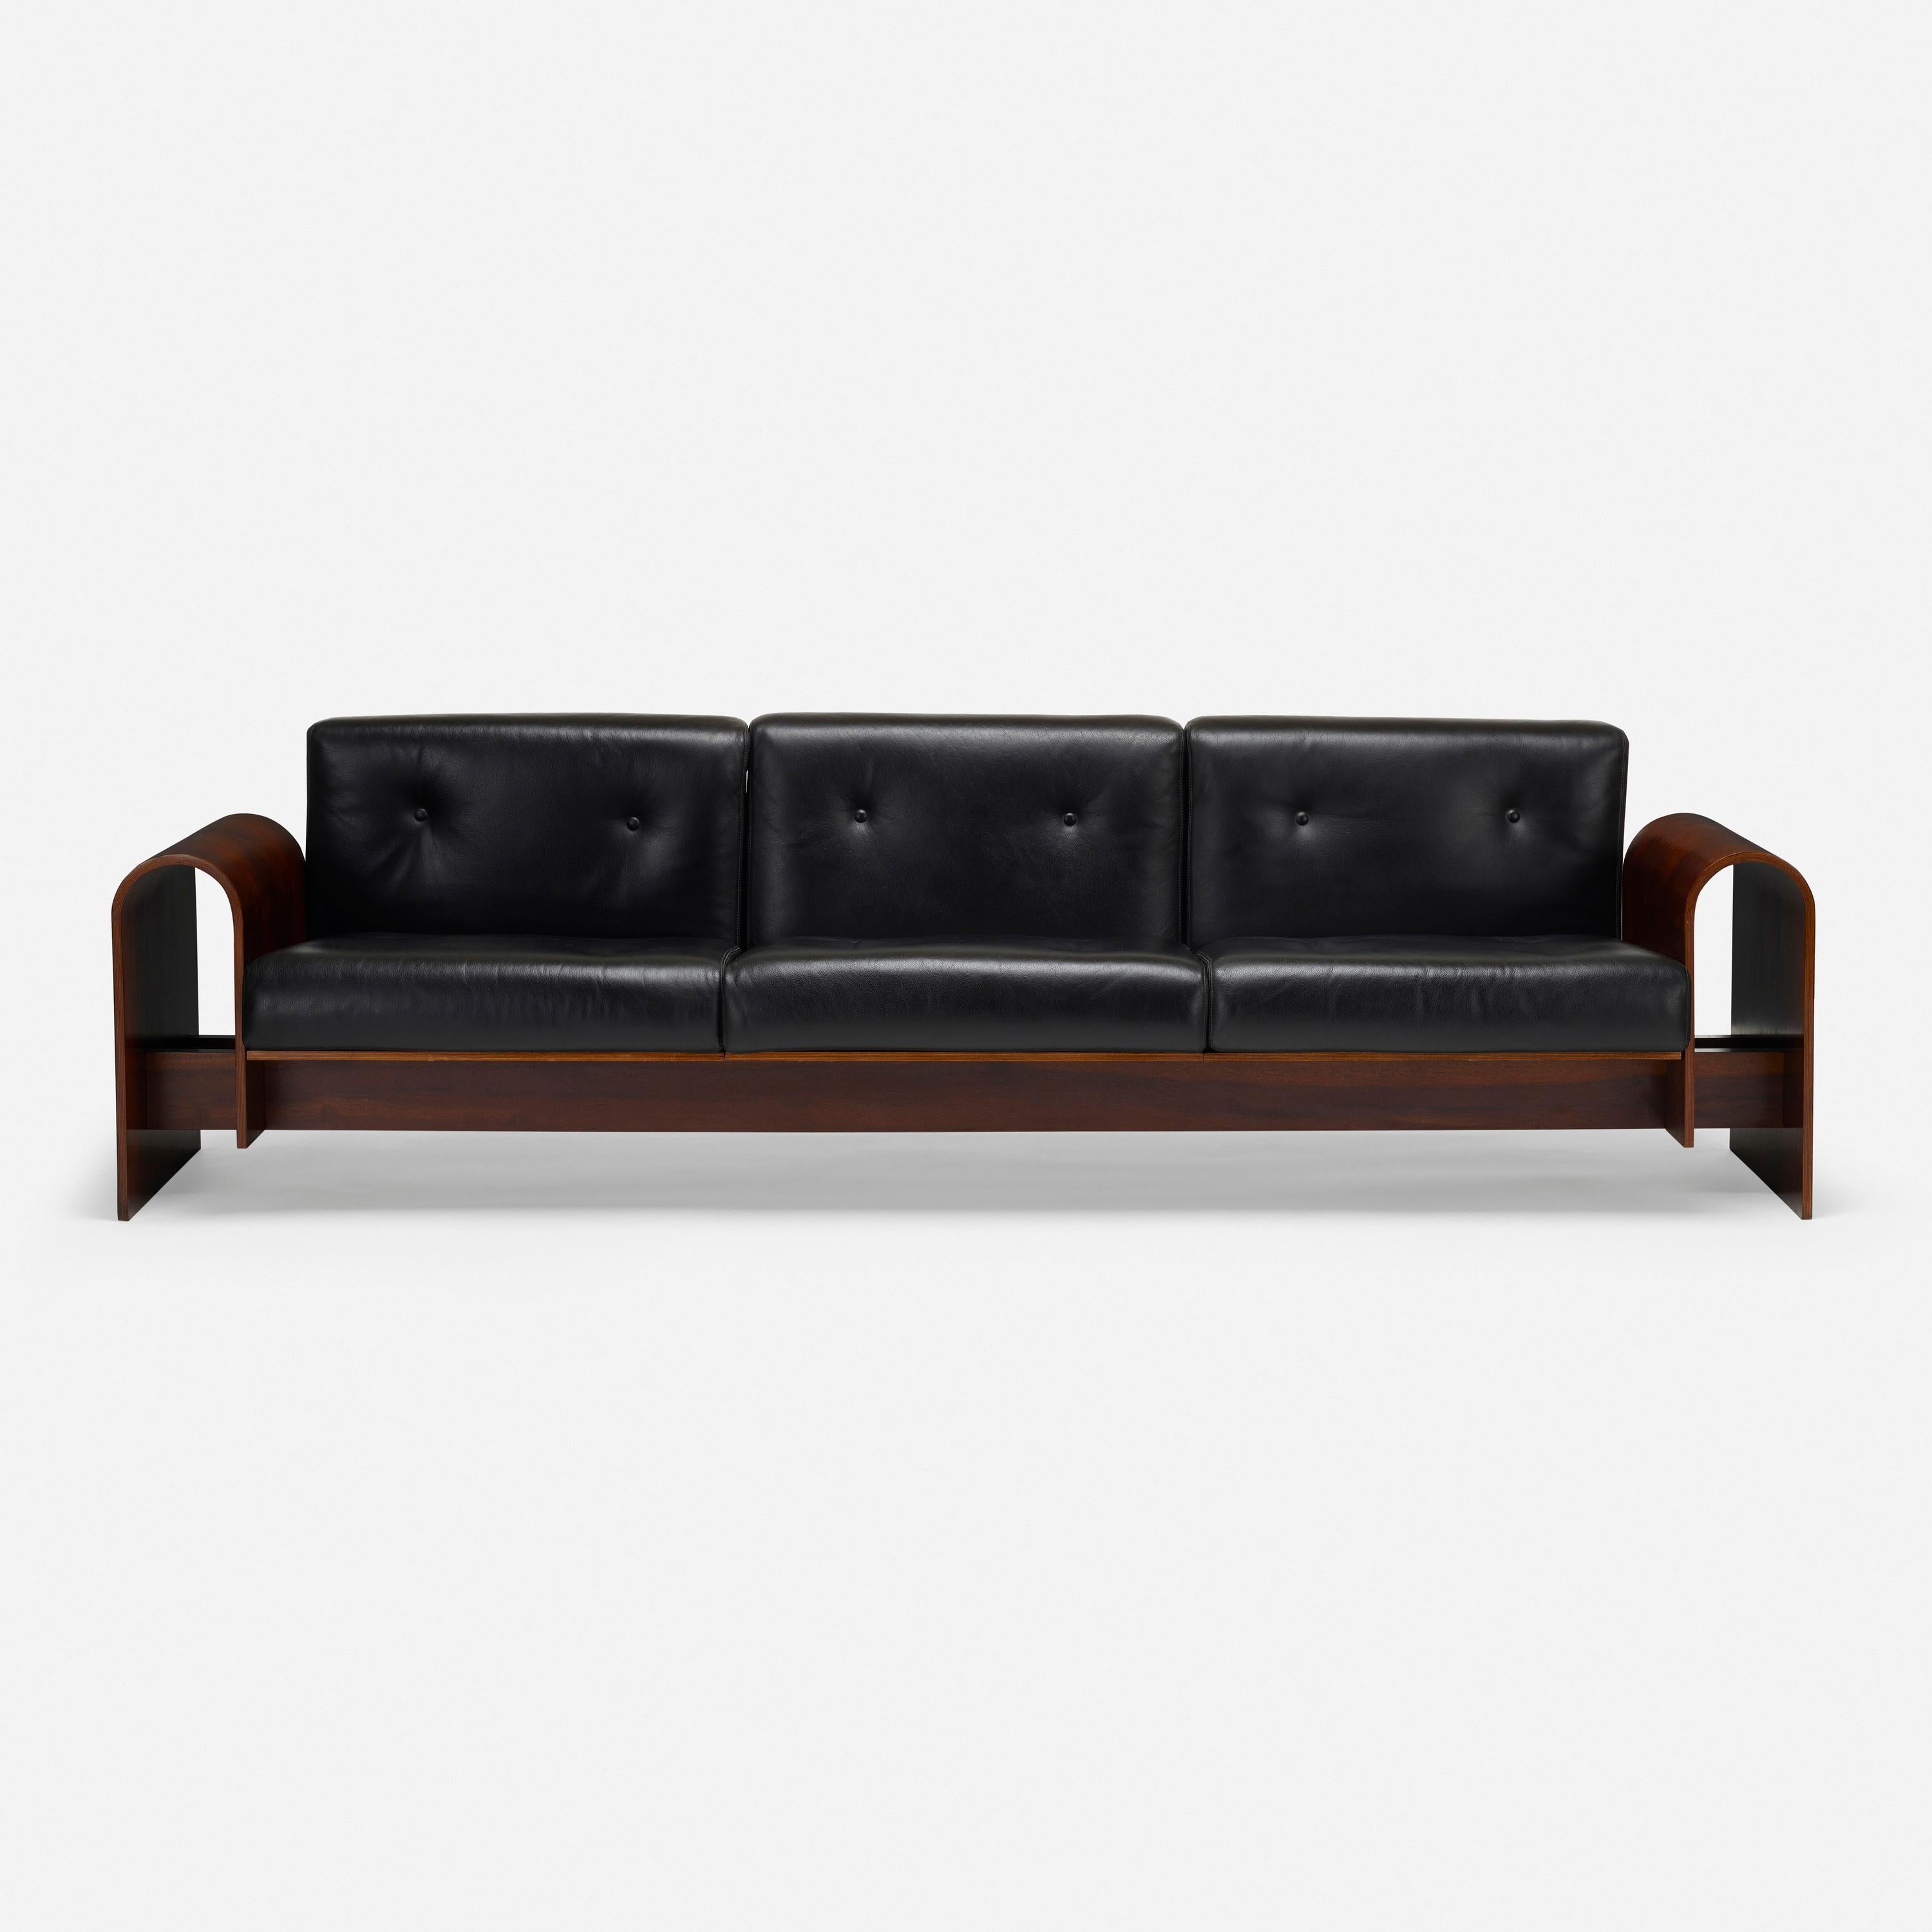 Oscar Niemeyer (1907 - 2012)

A rare, three-seat sofa by Oscar Niemeyer for the SESC Hotel Copacabana in Rio de Janeiro; in Brazilian rosewood with black leather cushions. A model of modernist sensuality that makes remarkable use of Niemeyer’s